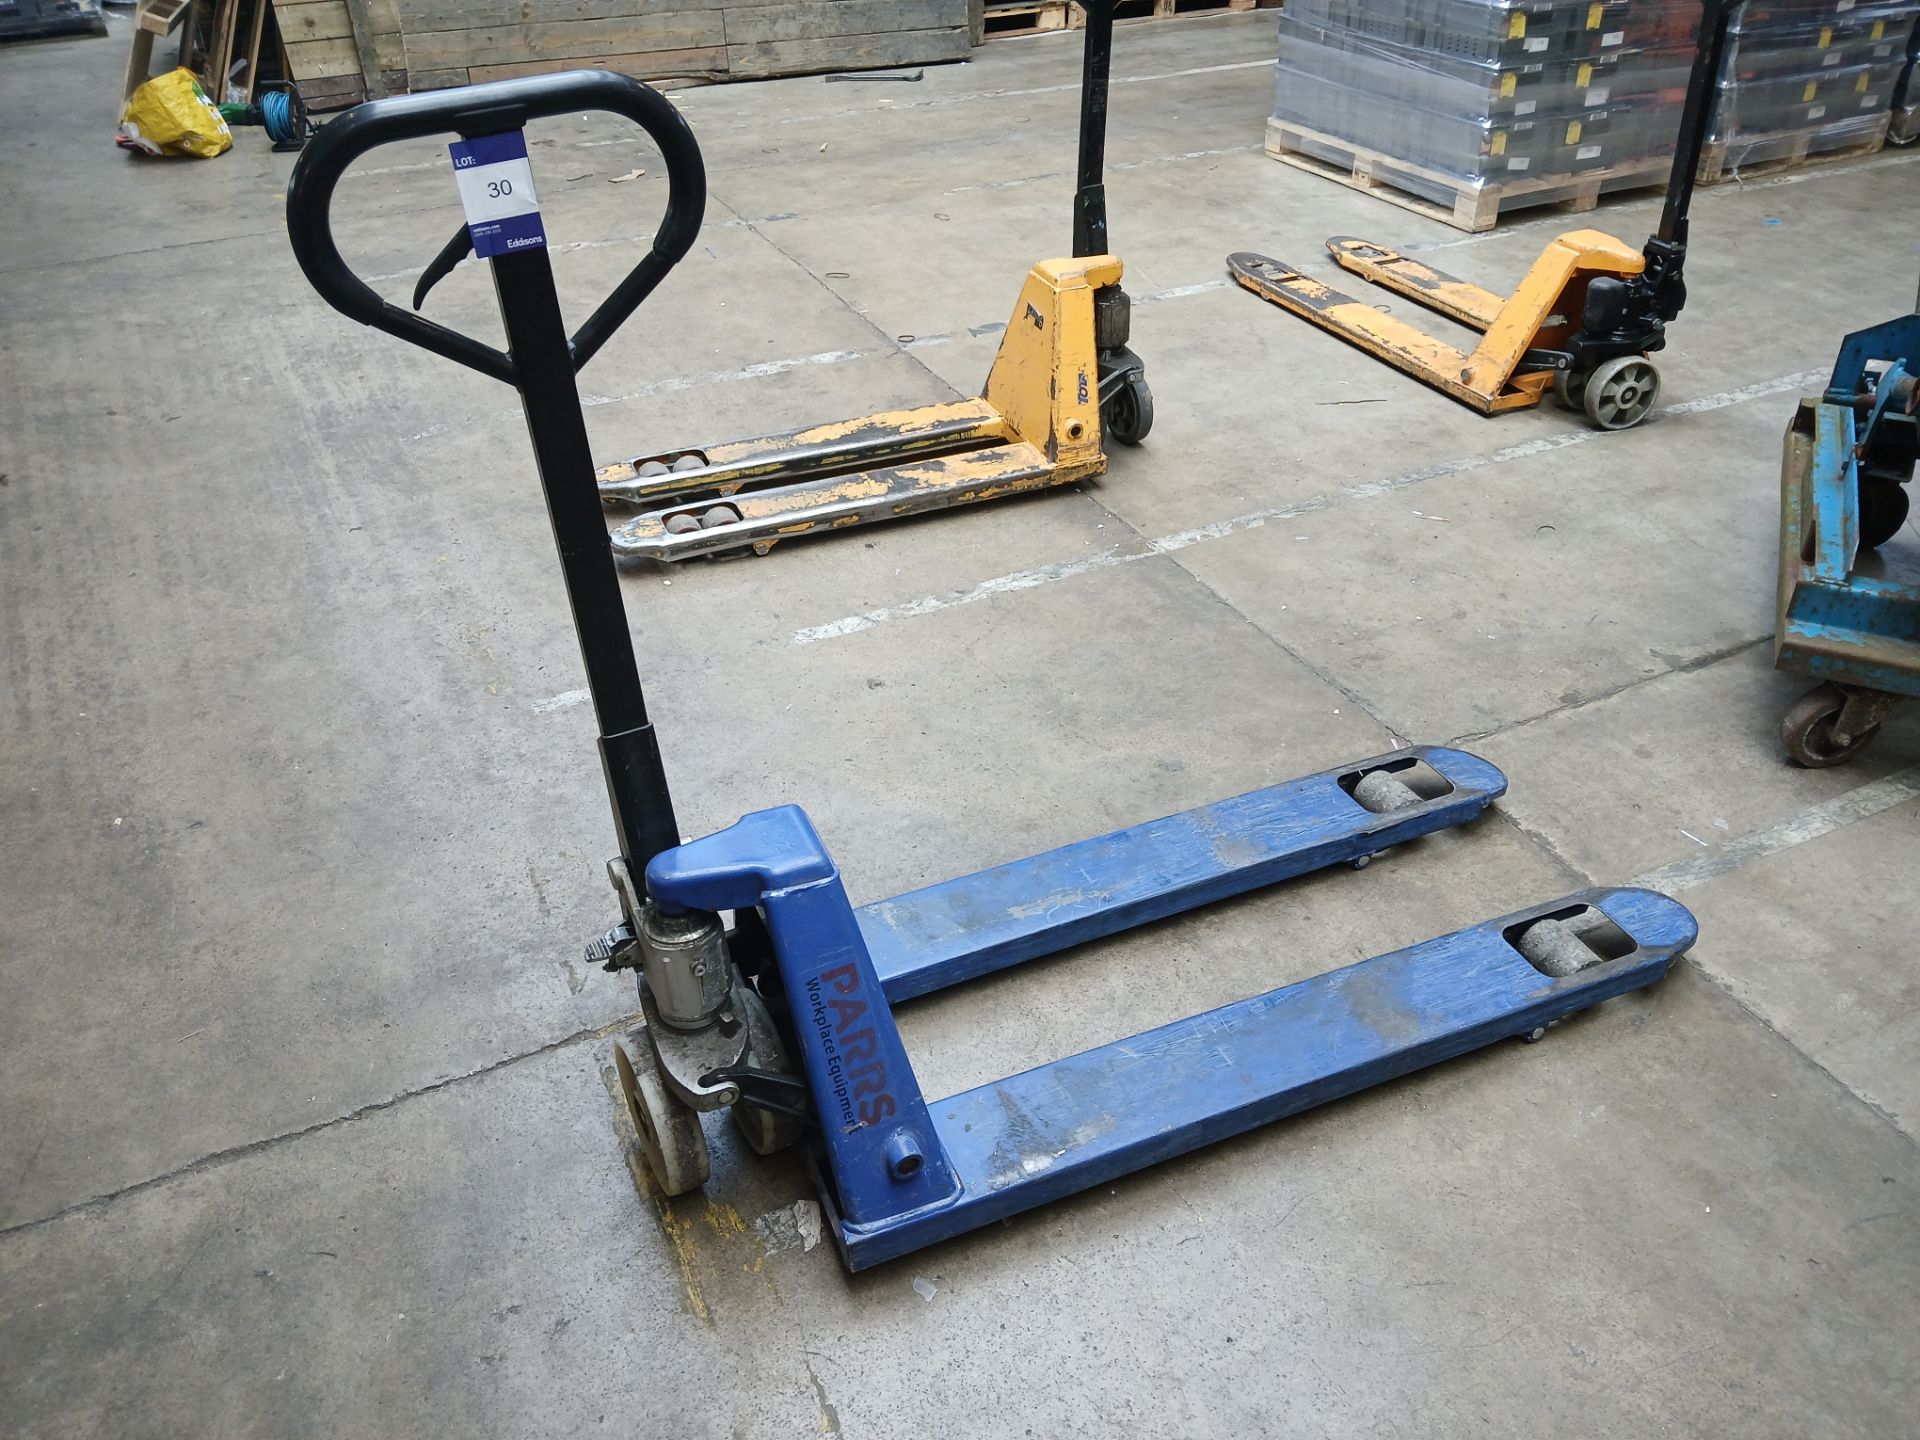 RHP25 2,500kg capacity pallet truck, Please note that collection of this lot will be delayed until